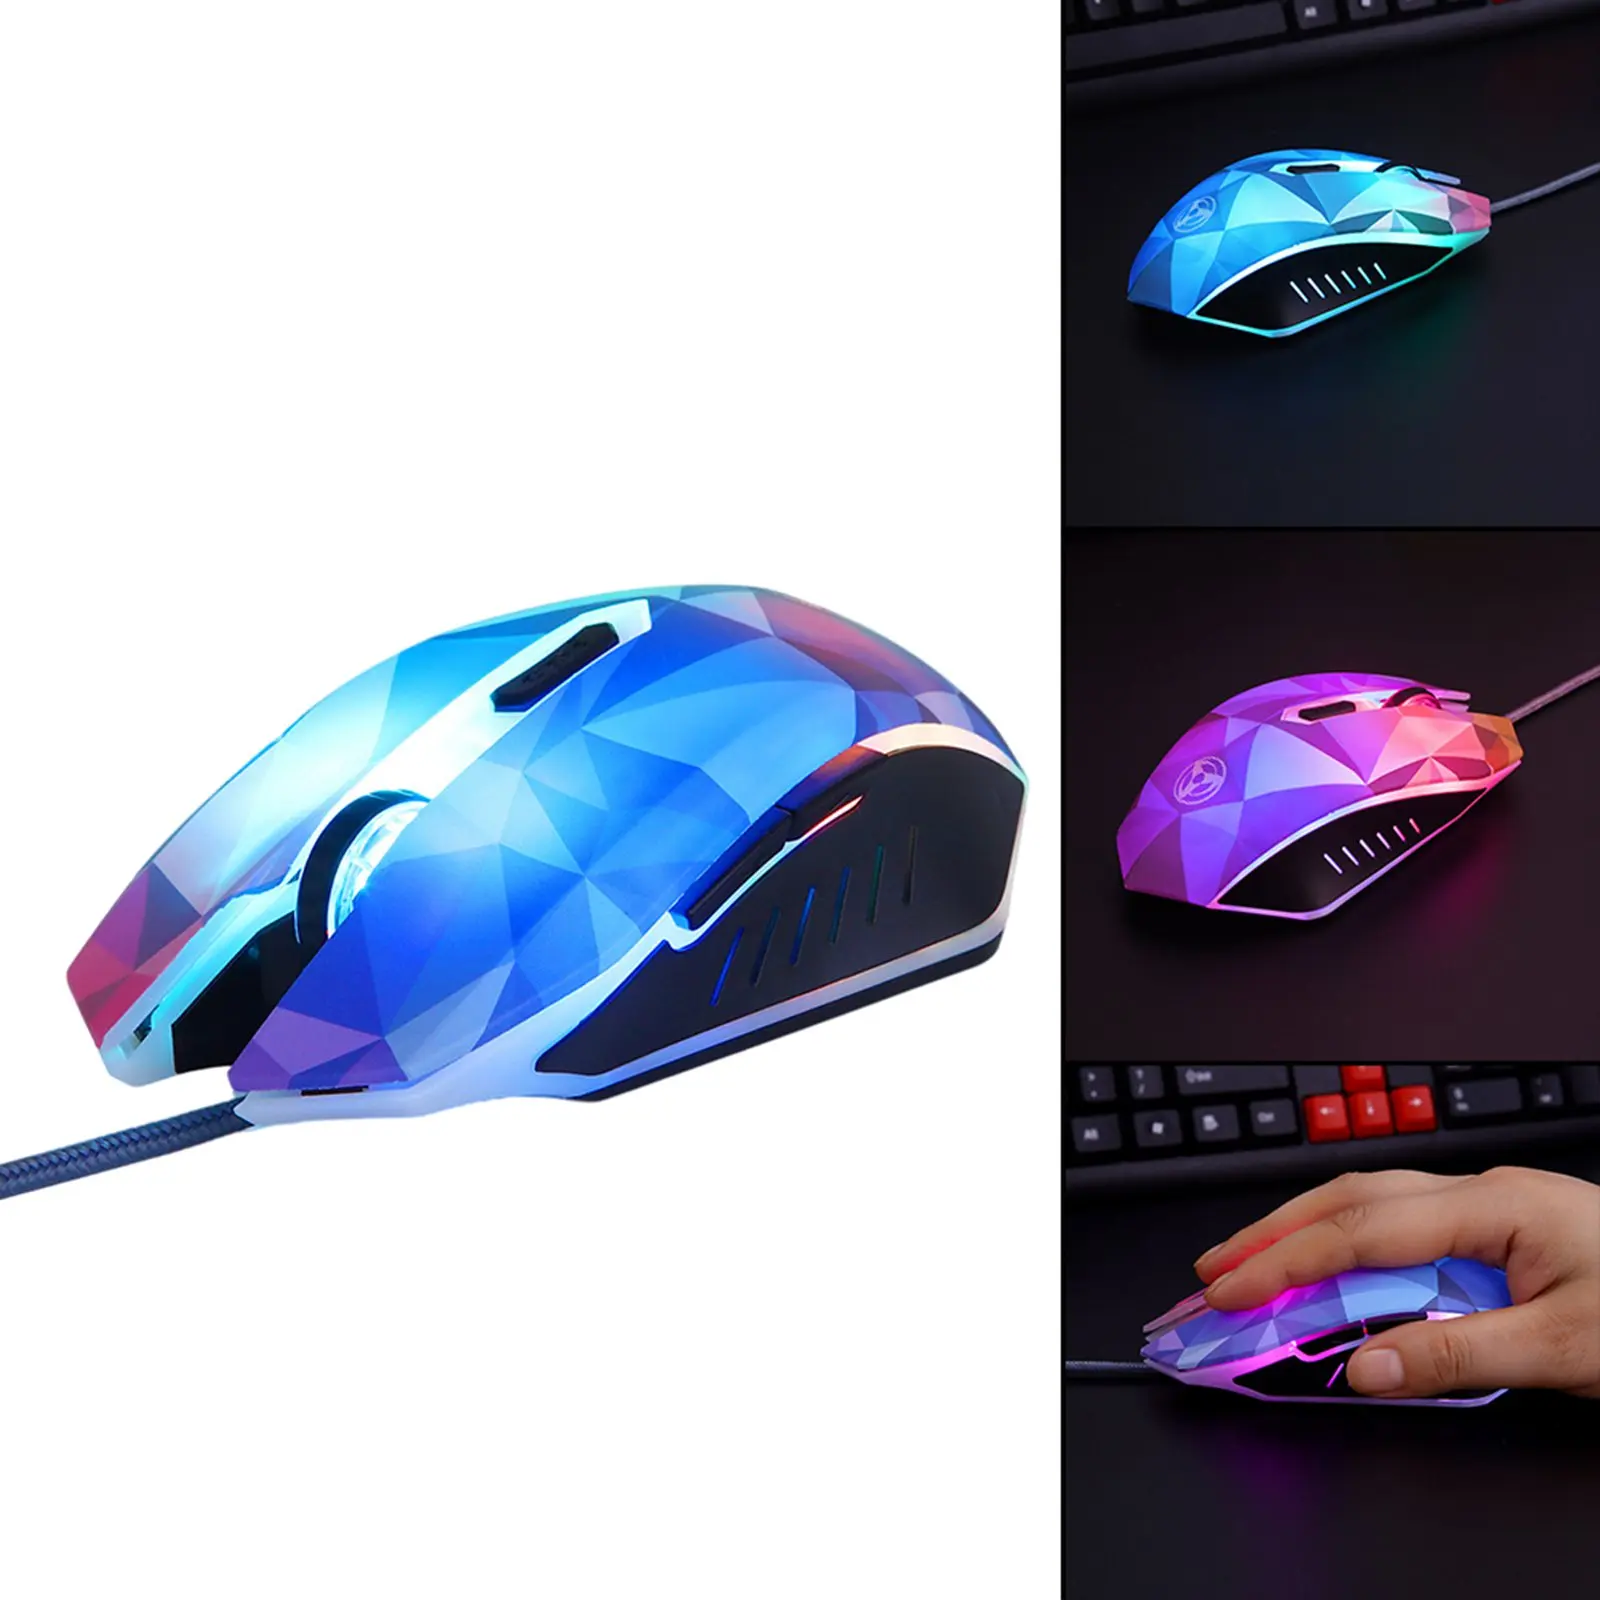 Game Wired Mice USB Cable Computer Desktop PC Accessories Ergonomic High Performance Plug and Play Gamer Gaming Room Boy